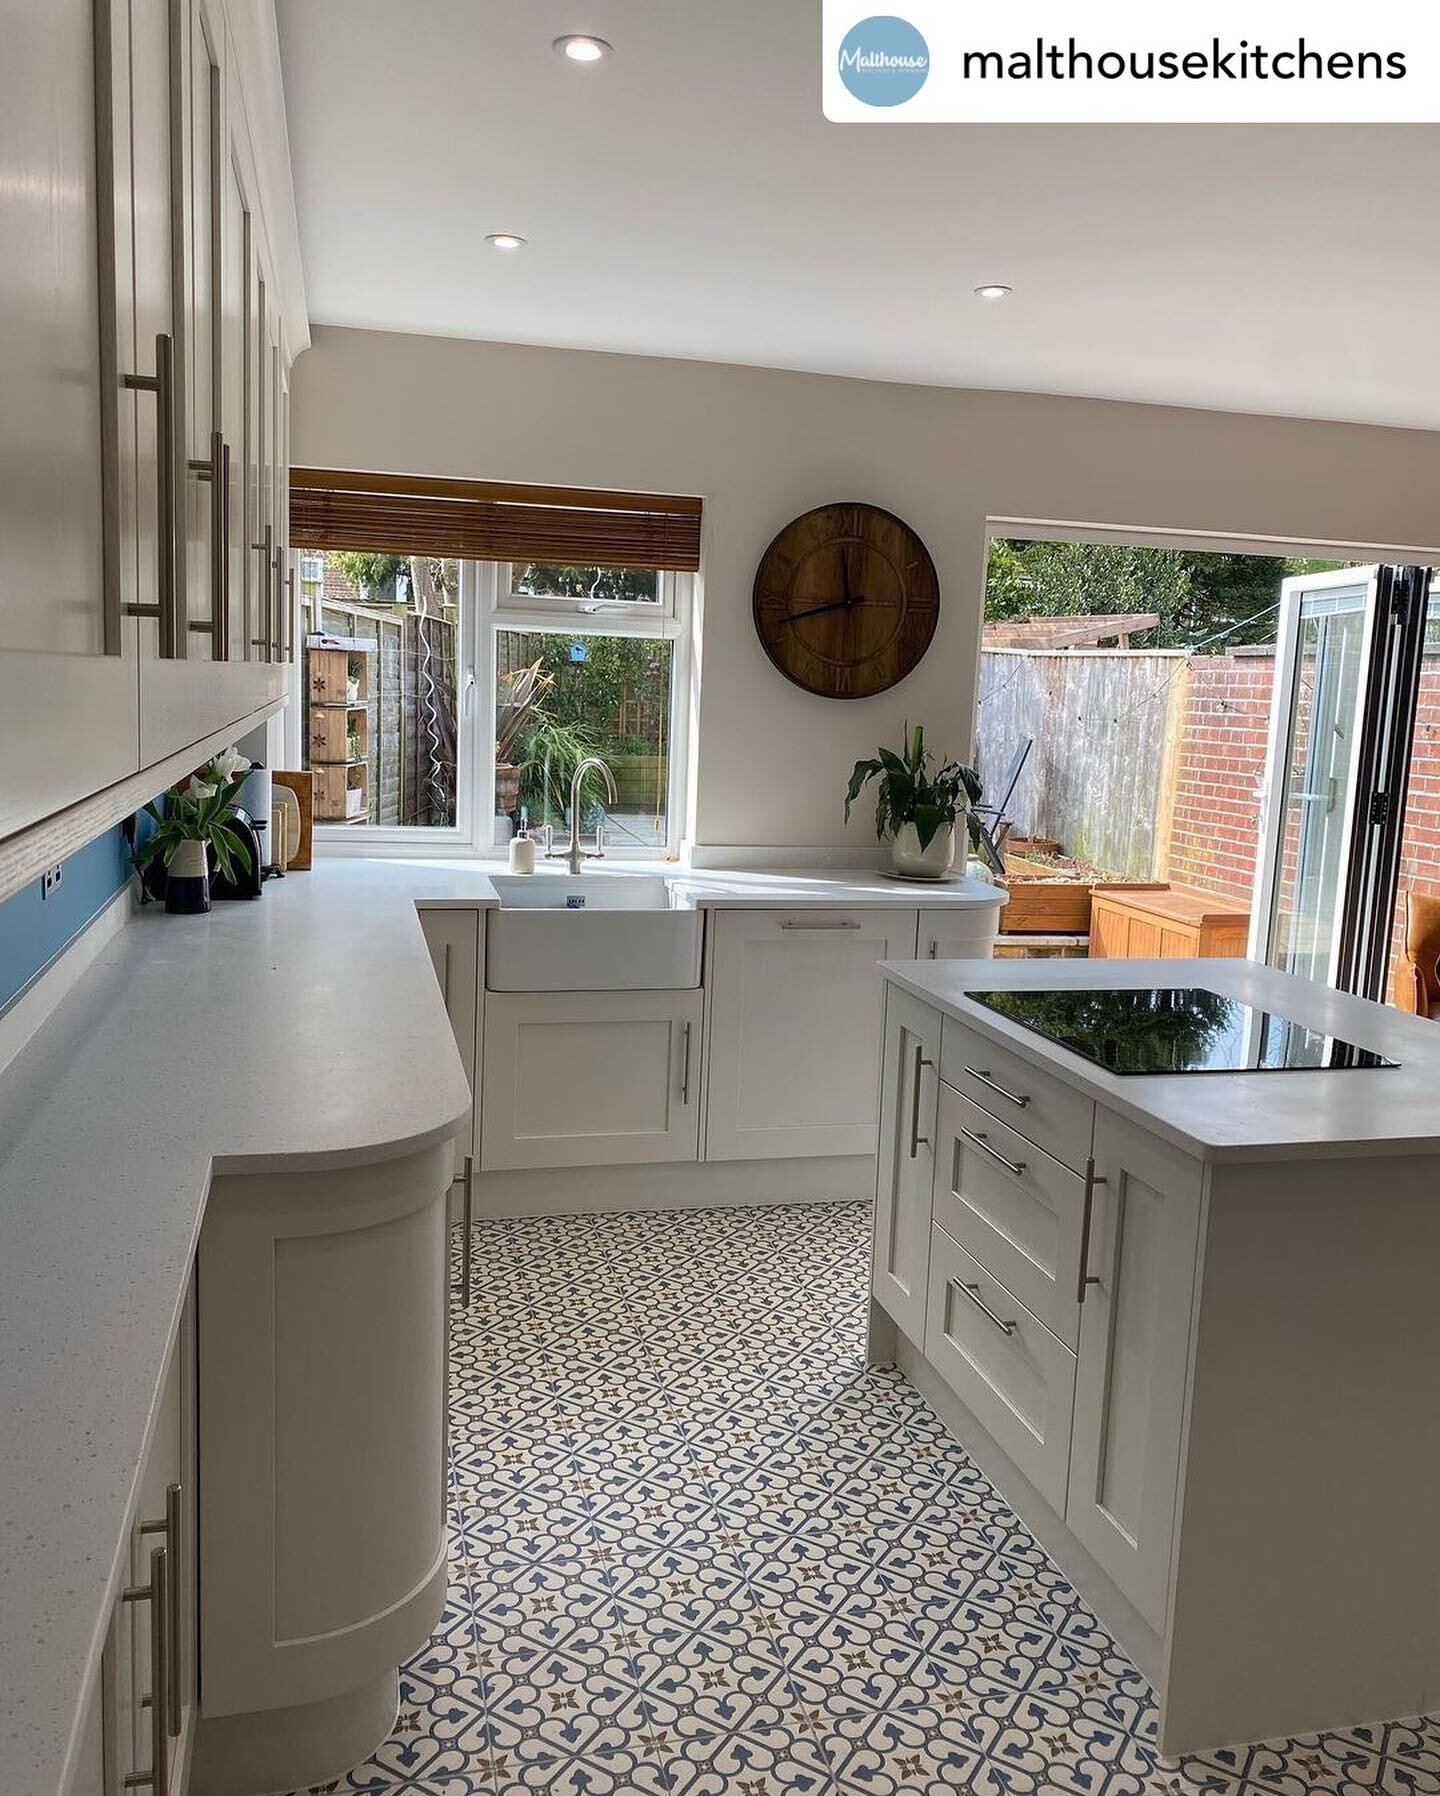 Another beauty by our regular customers @malthousekitchens in Salisbury 🤩

Colour matched units made by us here at DG Kitchens and features varying depth curved base units and one of our bespoke Belfast sink units. 

#supportlocal#kitchenideas #kitc